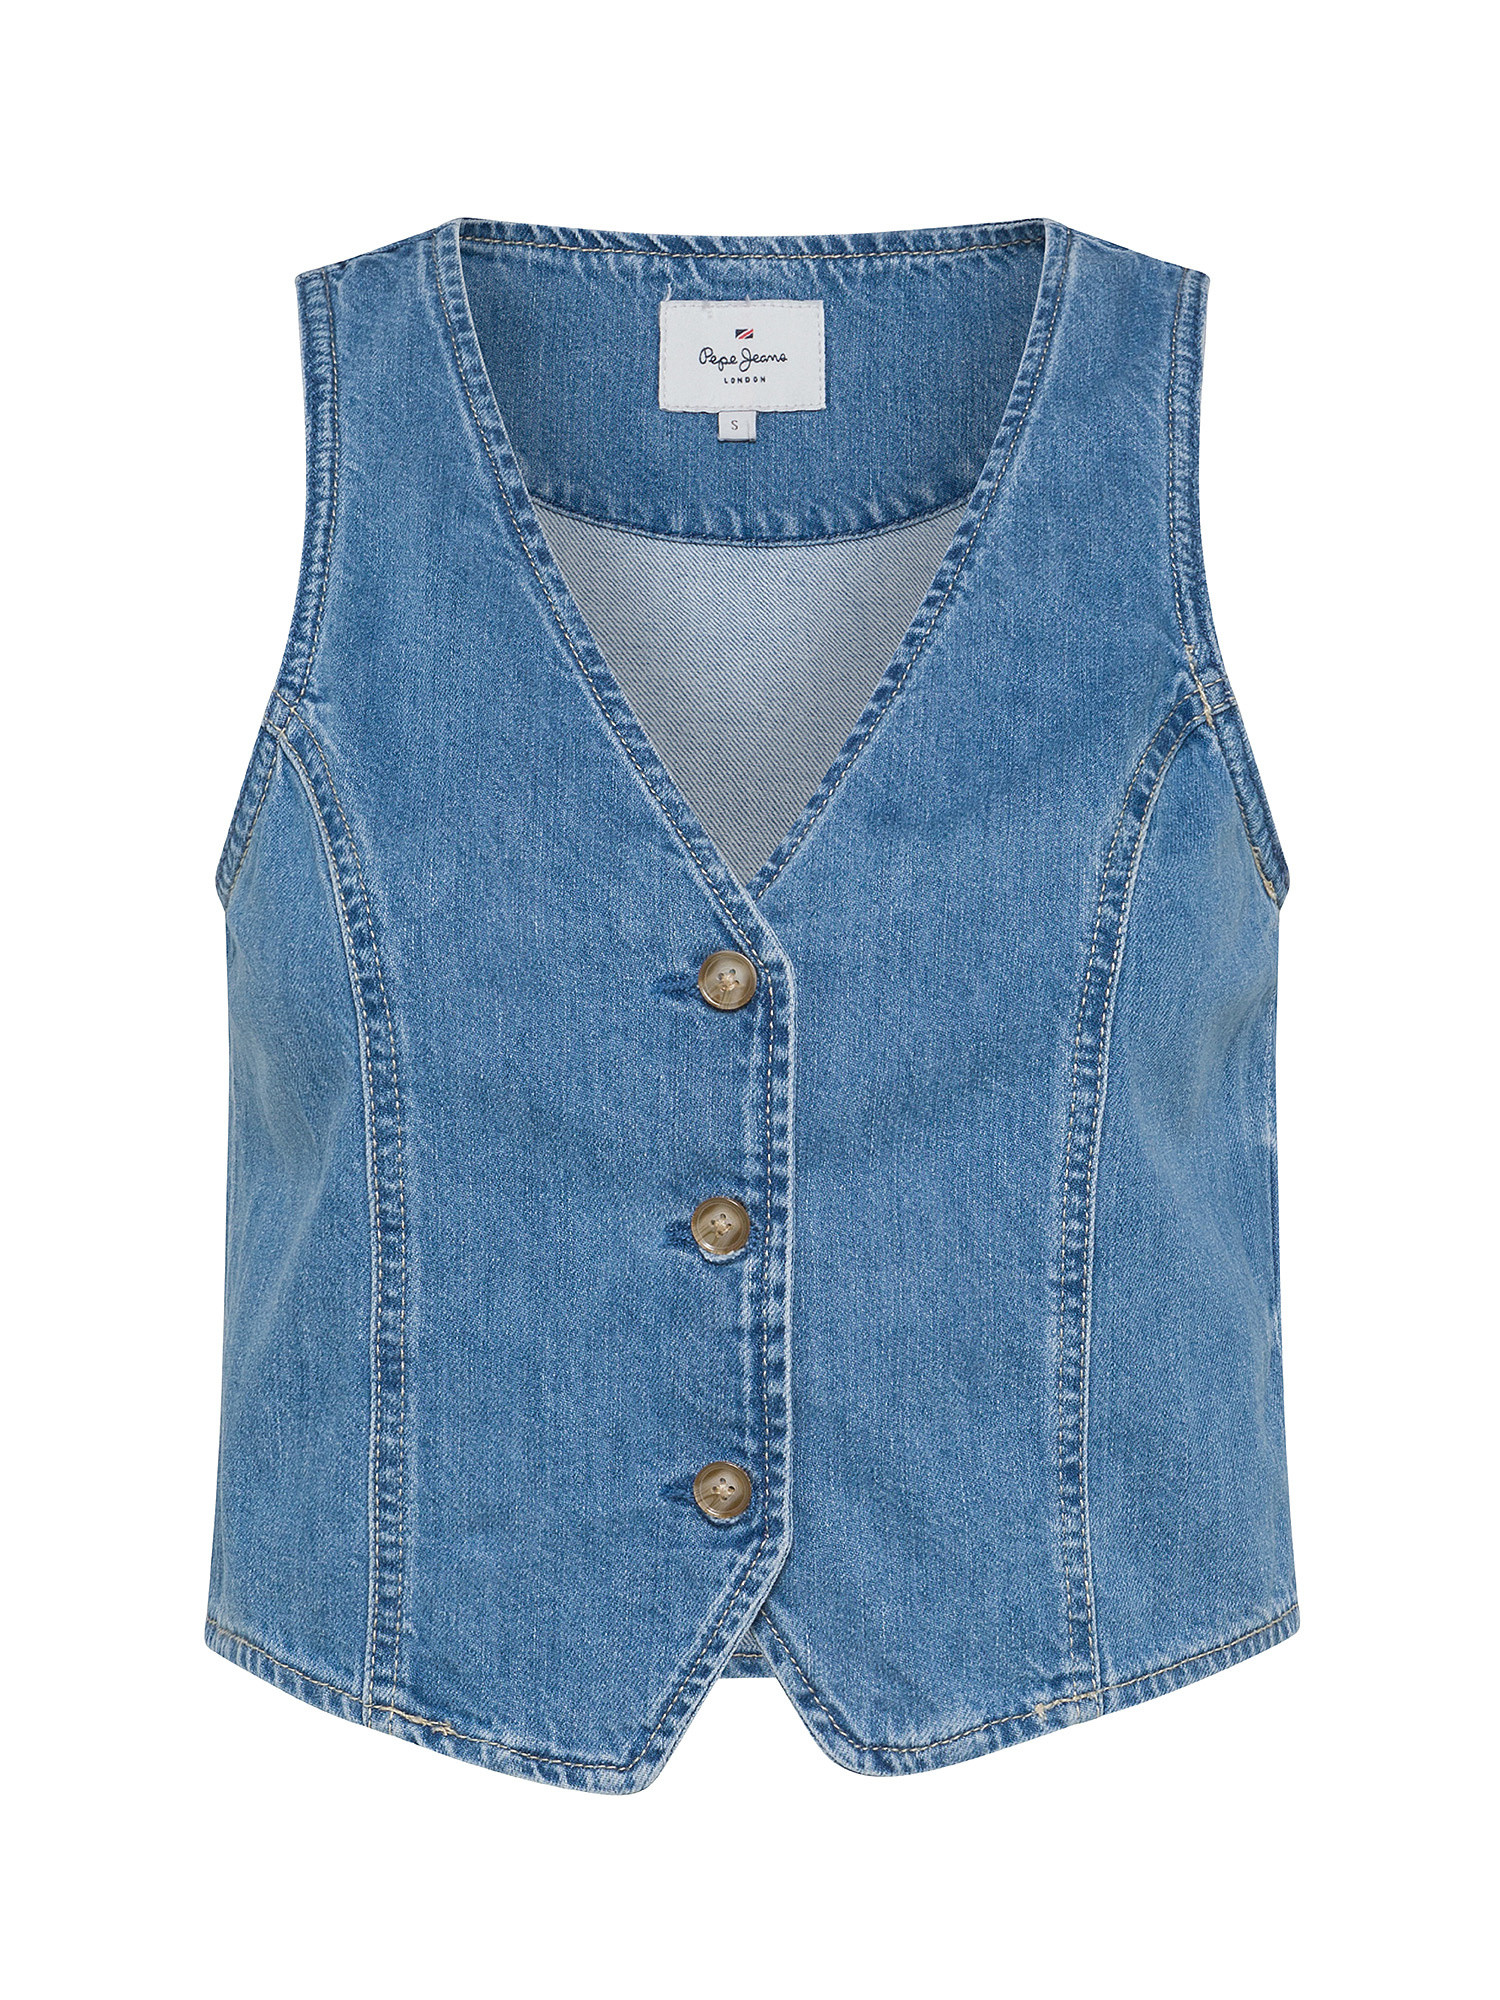 Pepe Jeans -  Gilet di jeans cropped, Denim, large image number 0